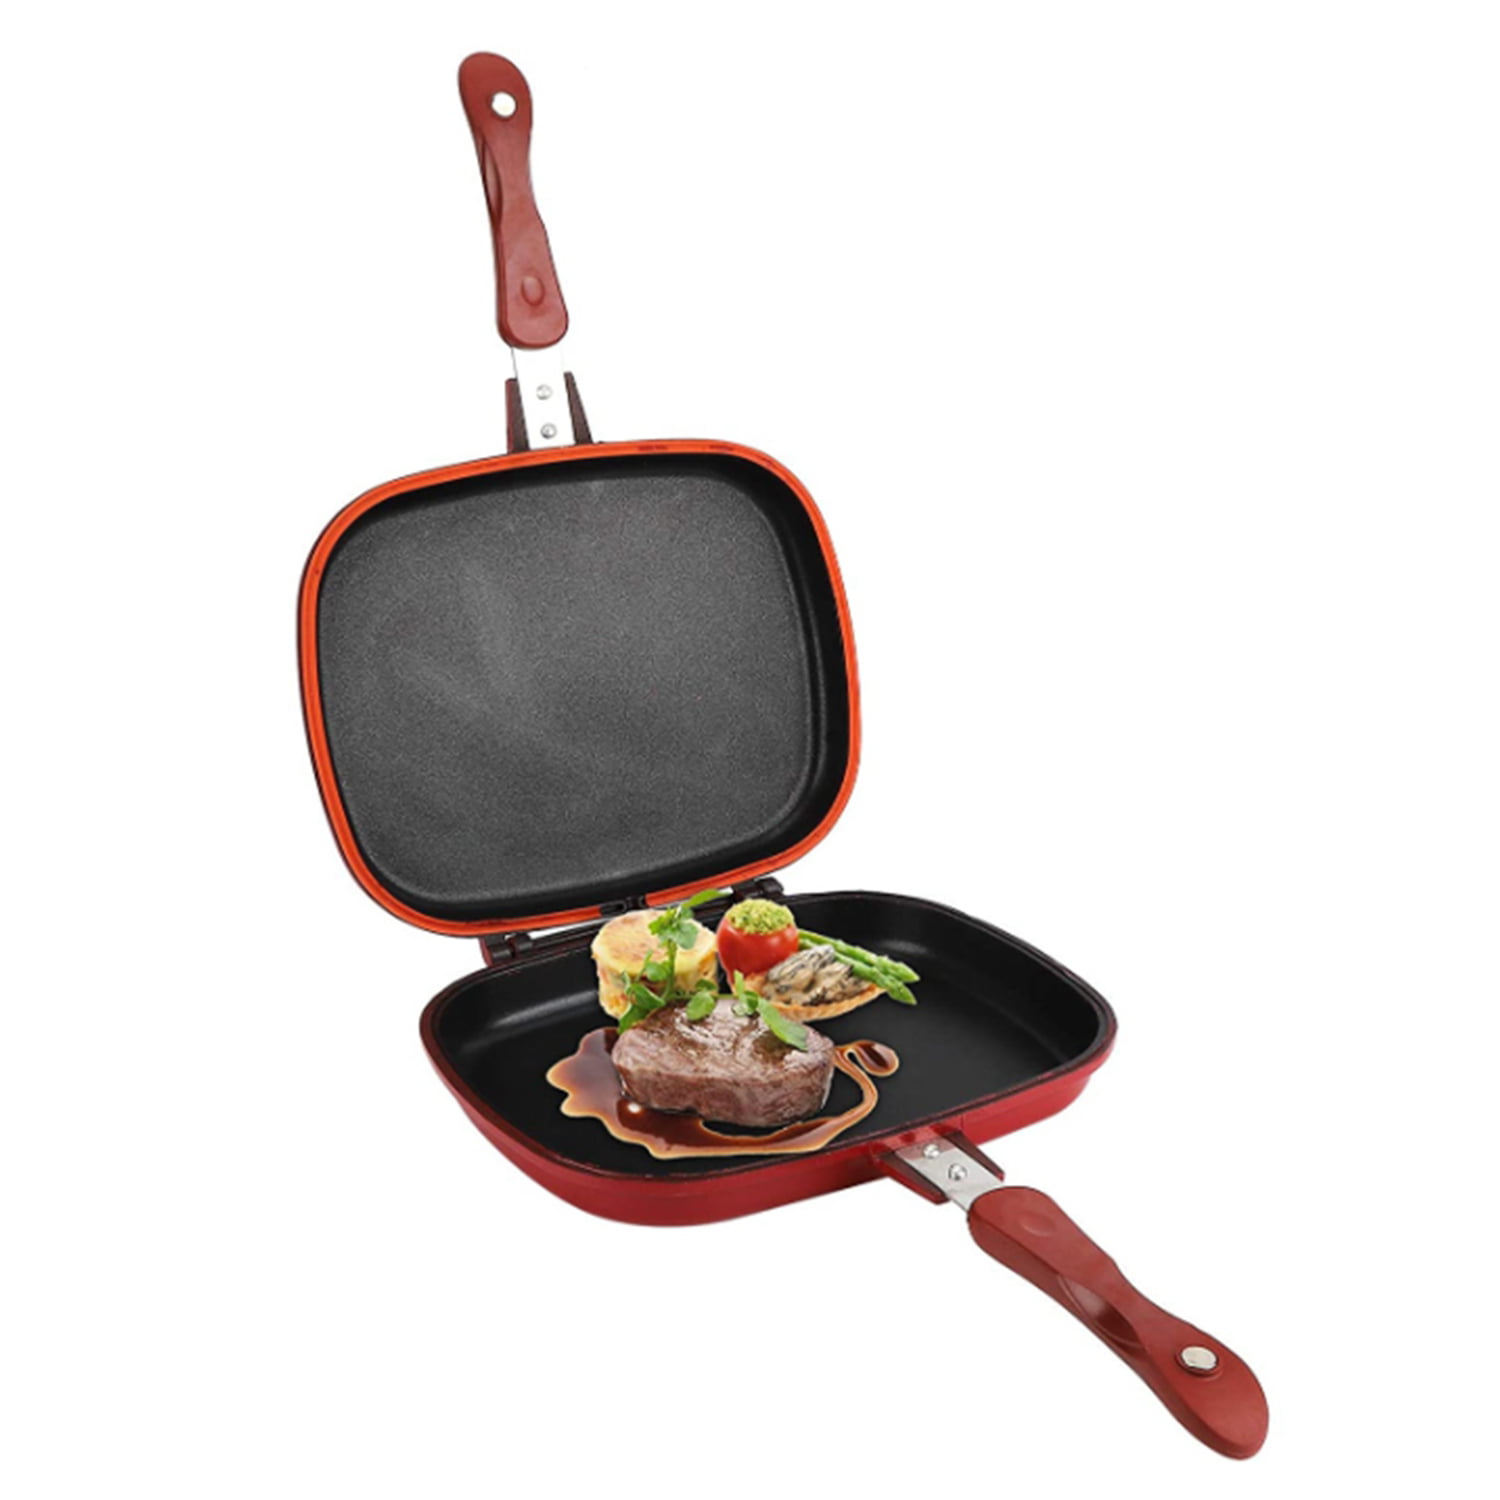 Double Sided Frying Pan Camping Sandwich Toaster Grill,Non-Stick Omelette Egg Breakfast Maker Aluminum Alloy Sandwich Toaster Mold Tortilla Pan Griddle Pan